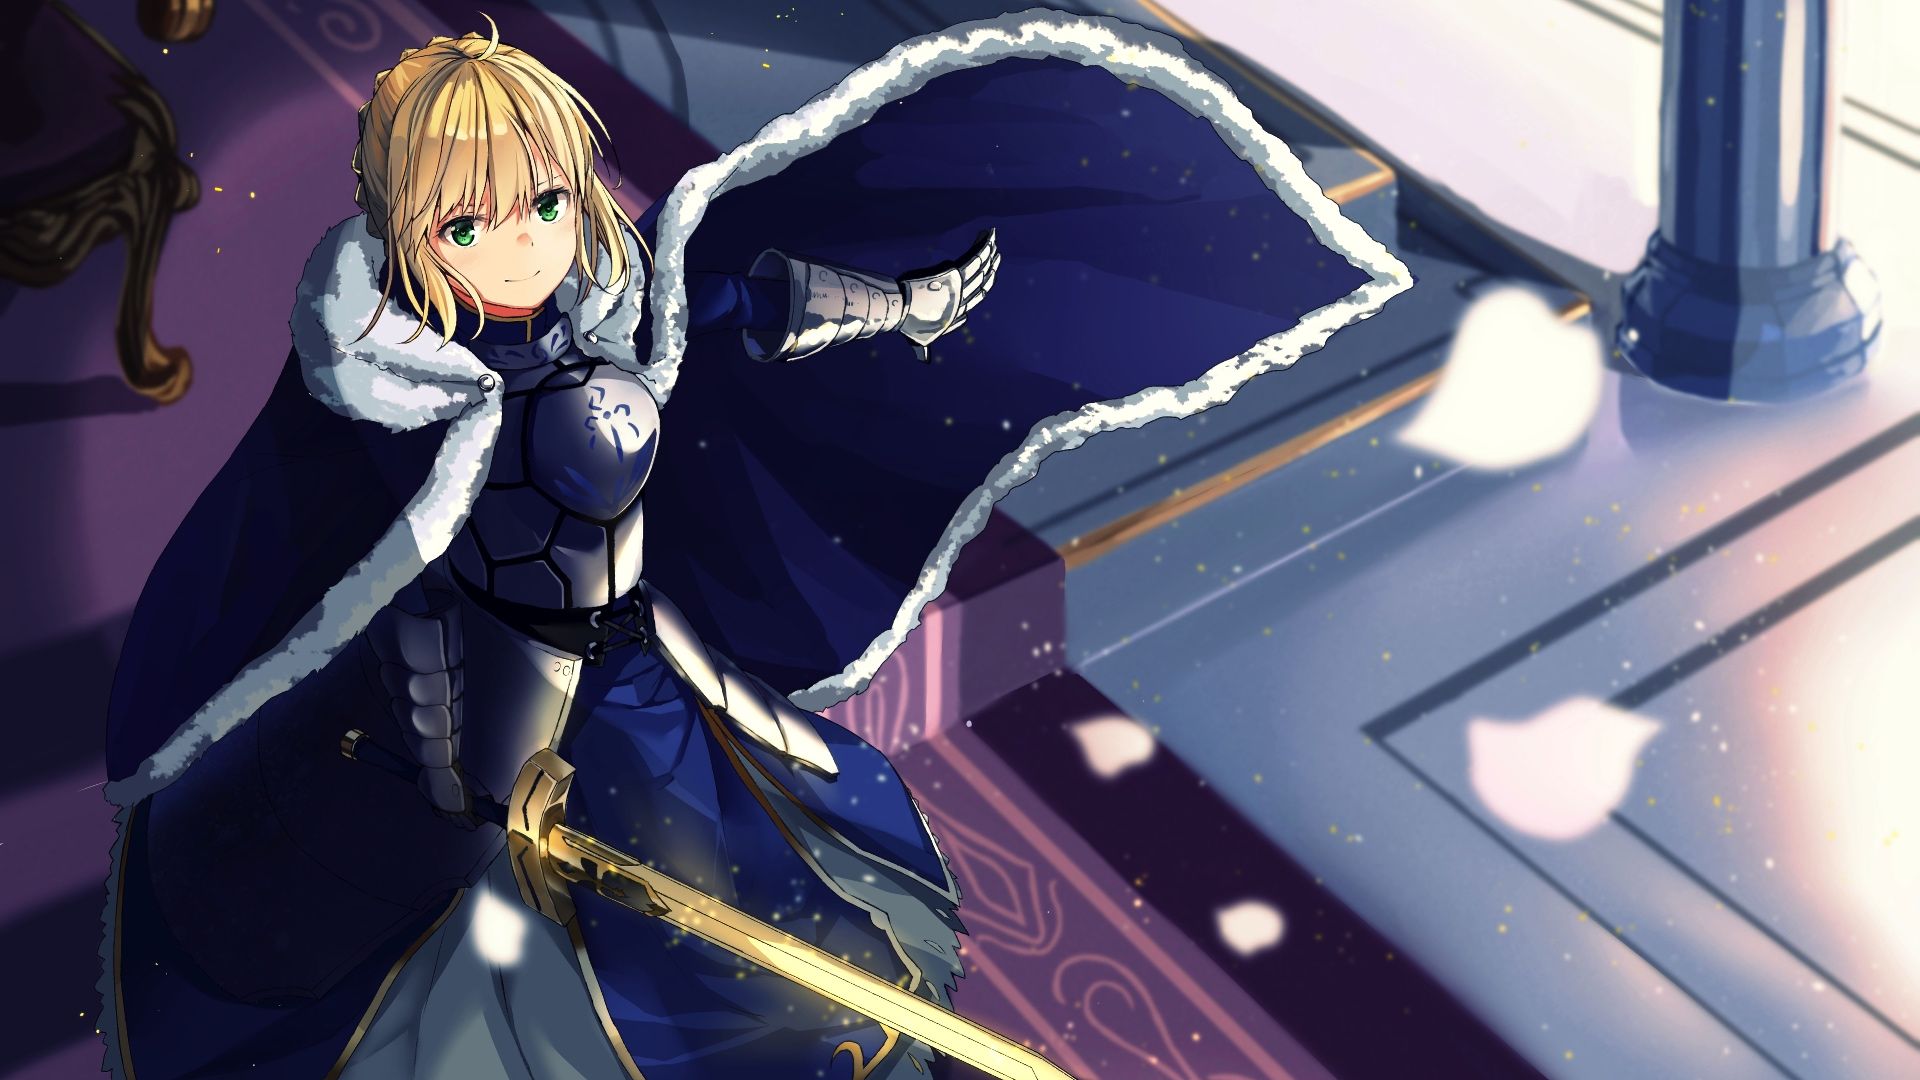 Wallpaper Saber, blonde, Fate/Stay Night, anime girl, sword